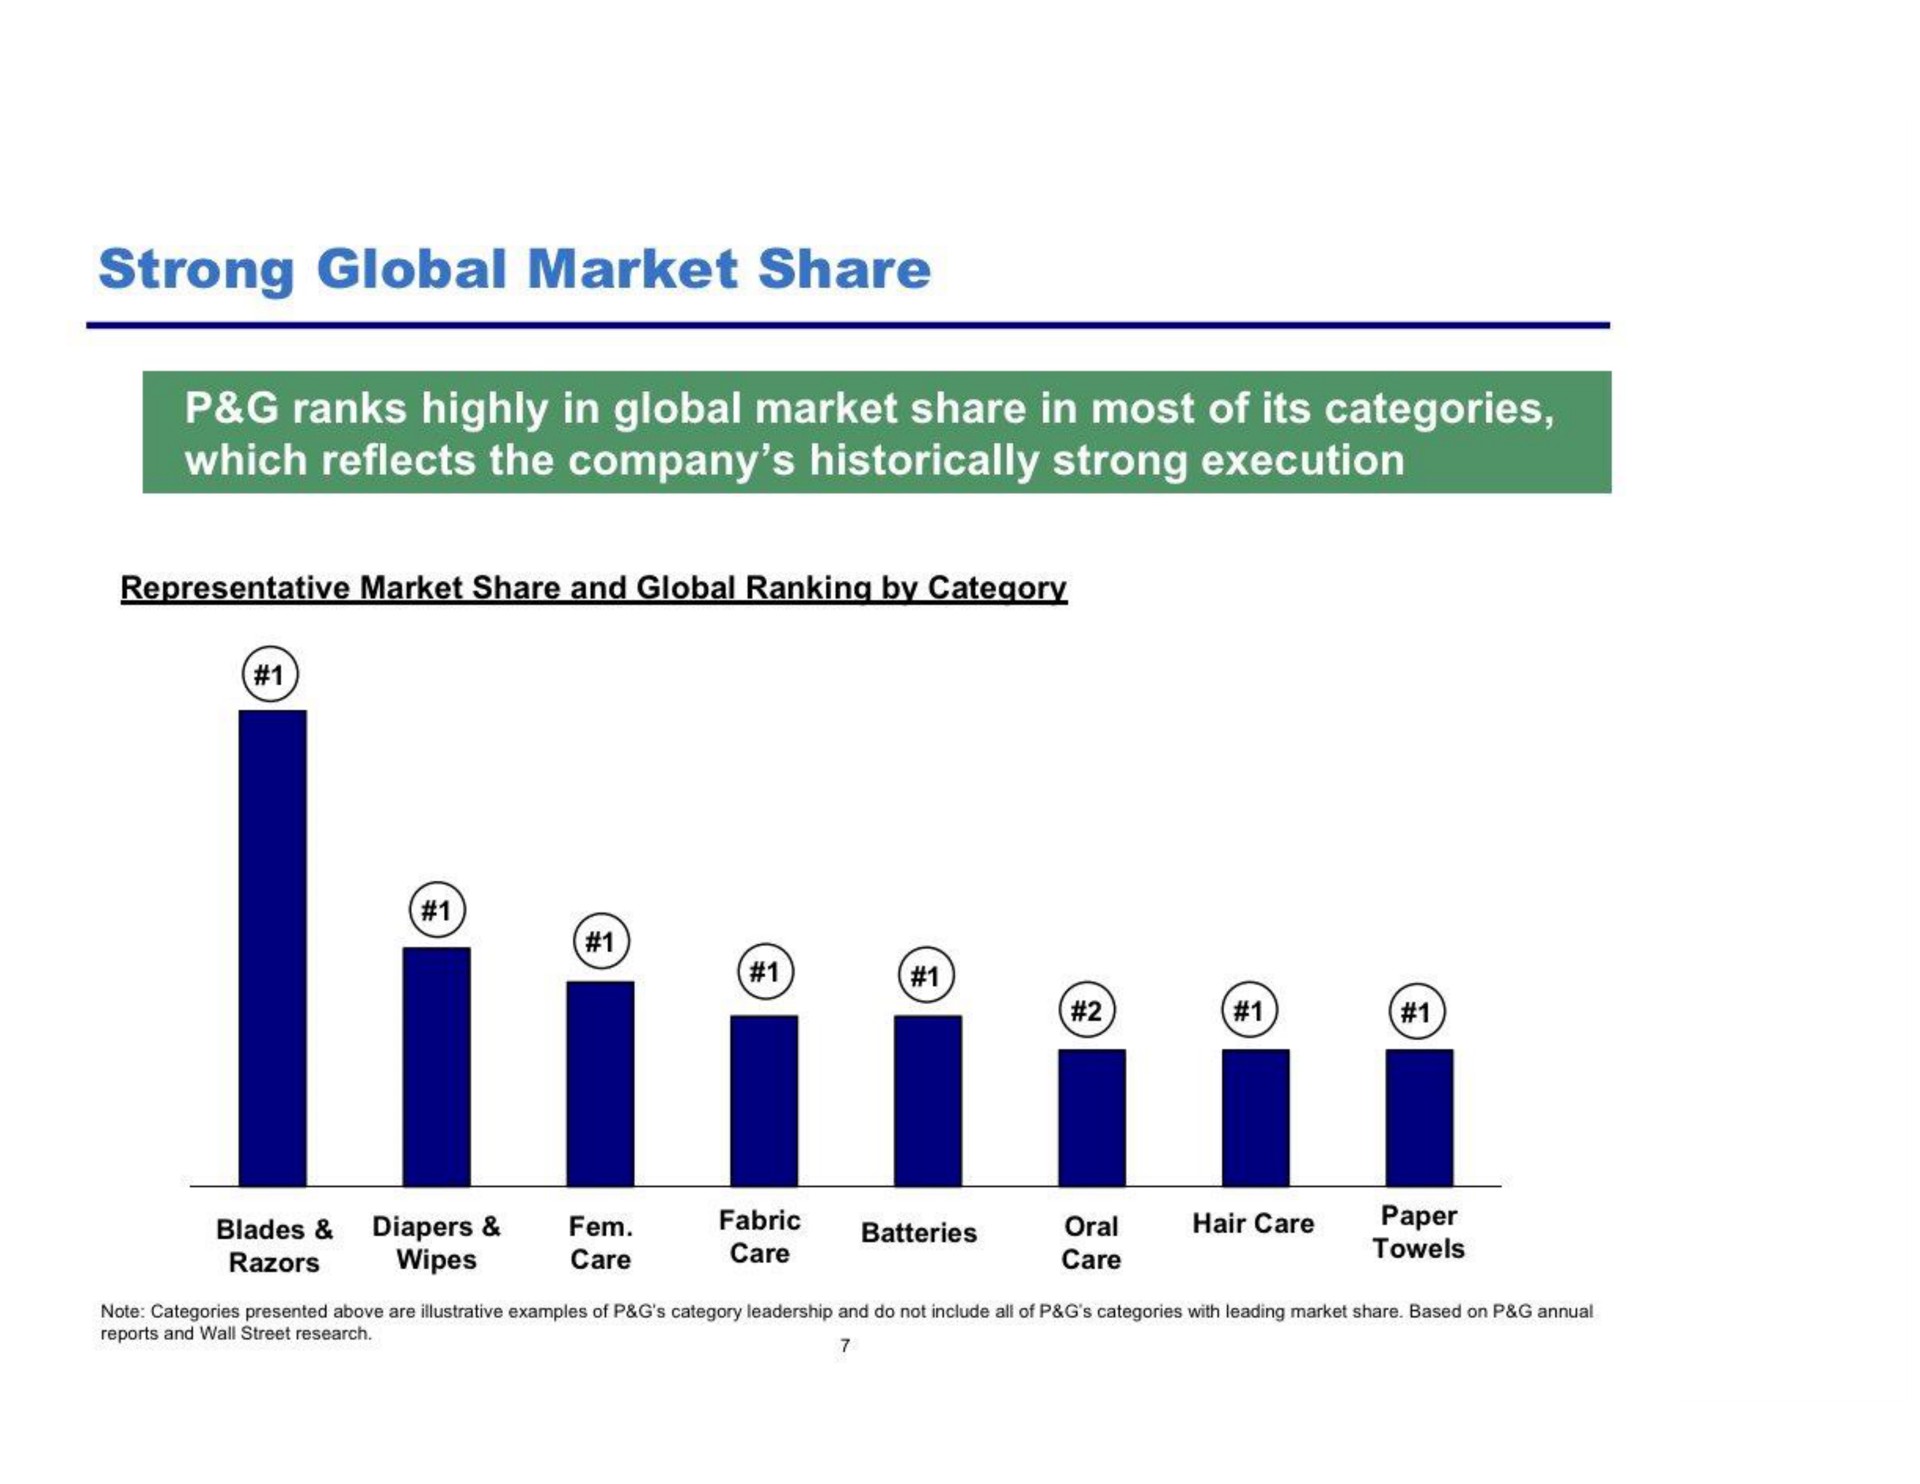 strong global market share | Pershing Square